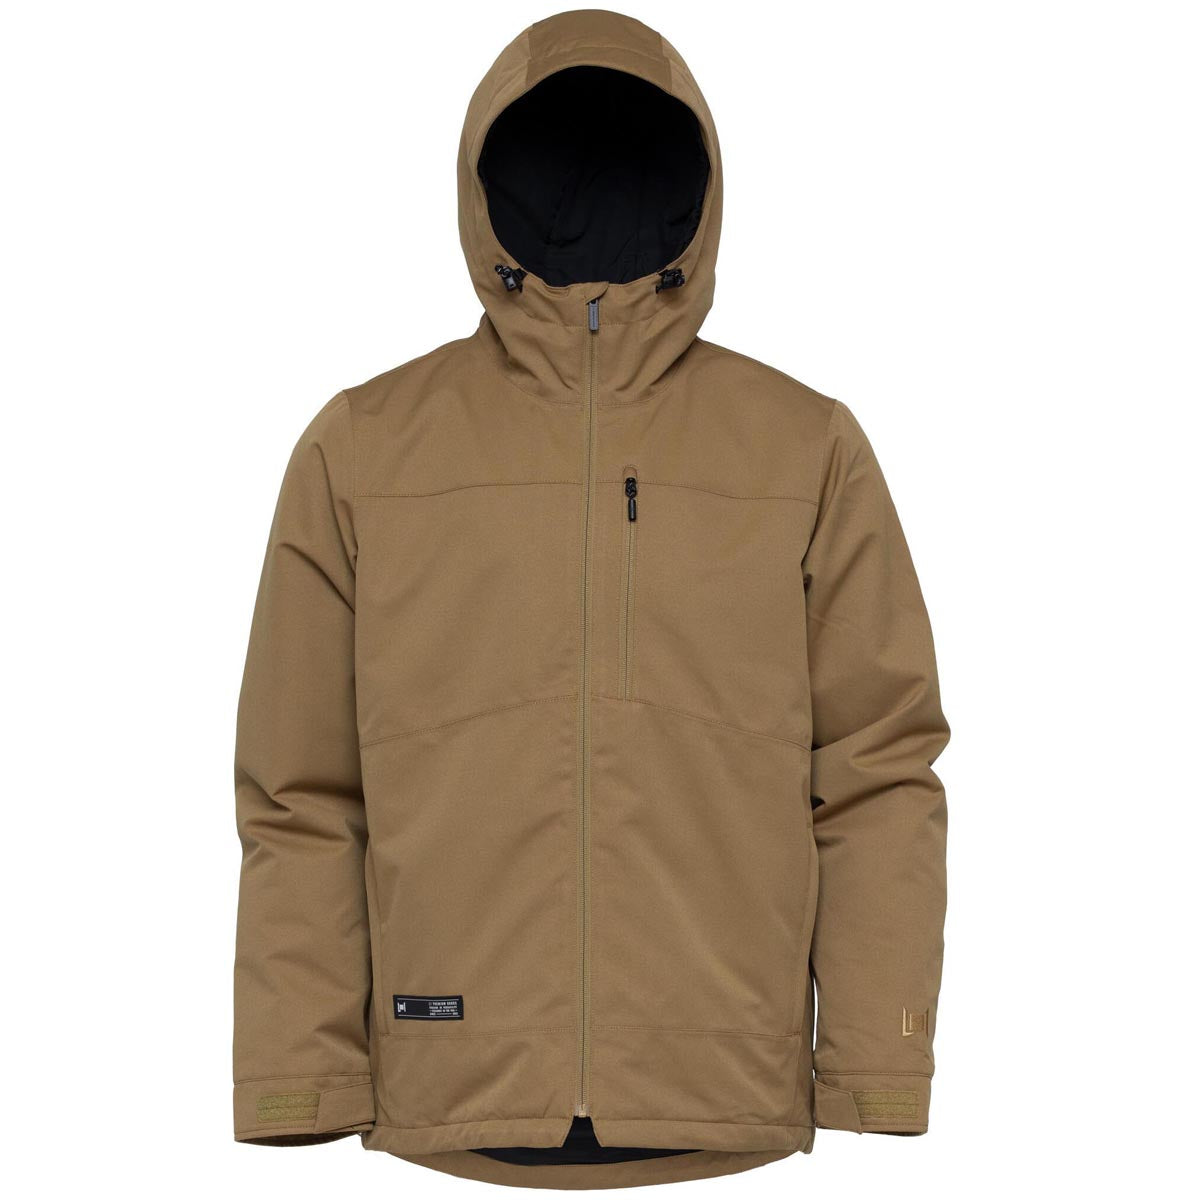 L1 Hasting 2024 Snowboard Jacket - Dull Gold image 2